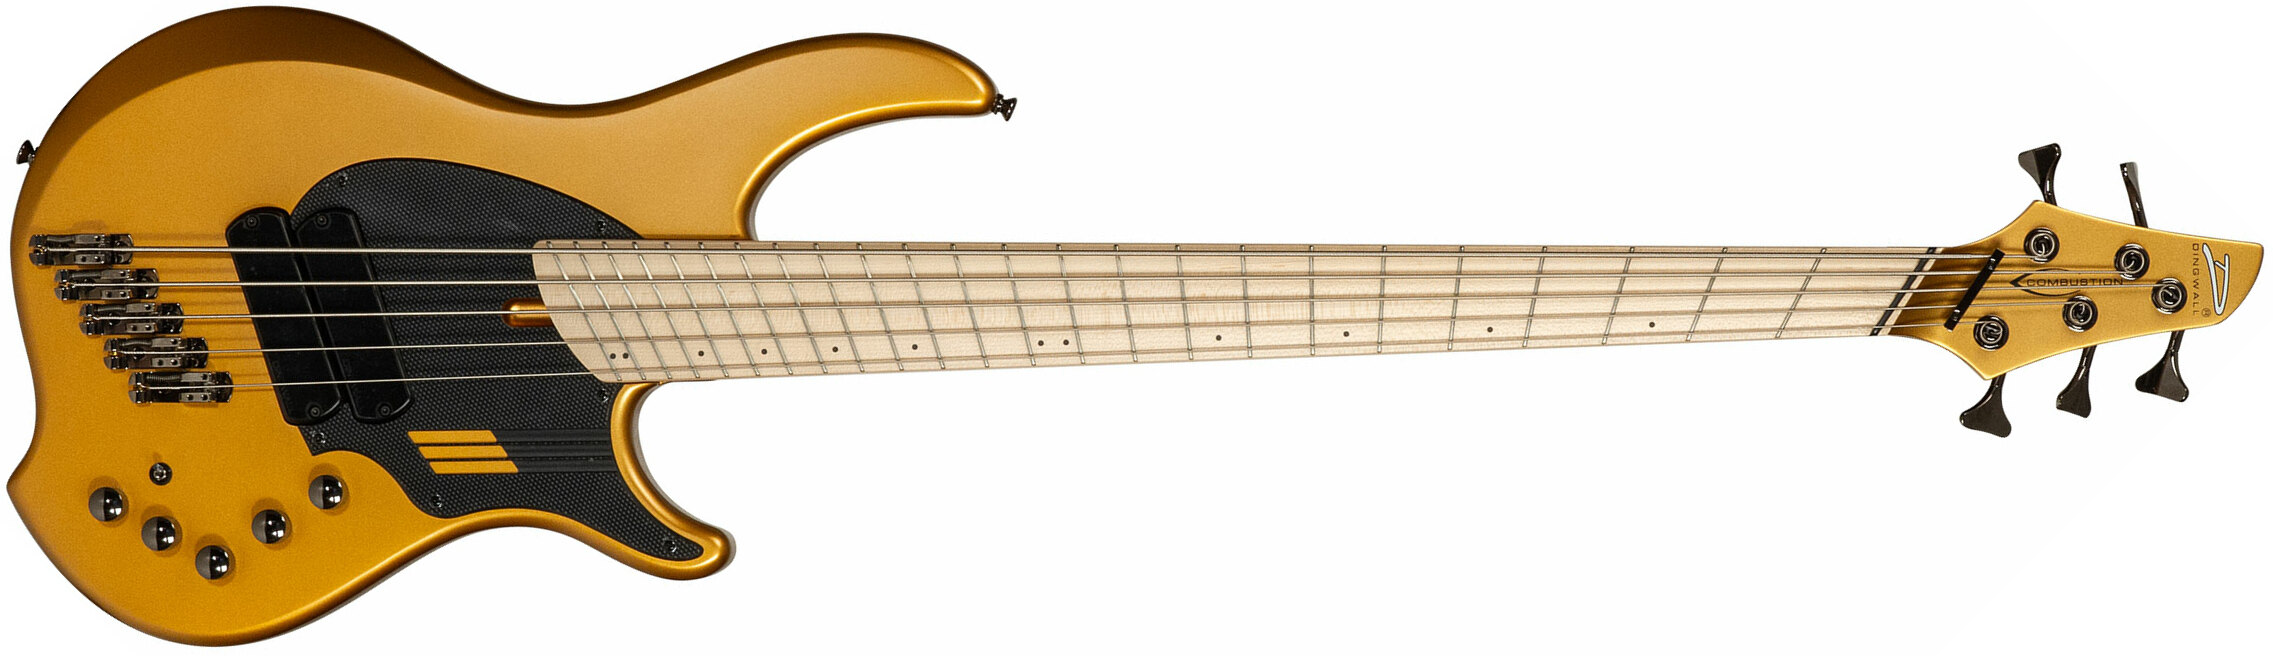 Dingwall Adam Nolly Getgood Ng2 5c Signature 2pu Active Mn - Gold Matte - Solid body electric bass - Main picture